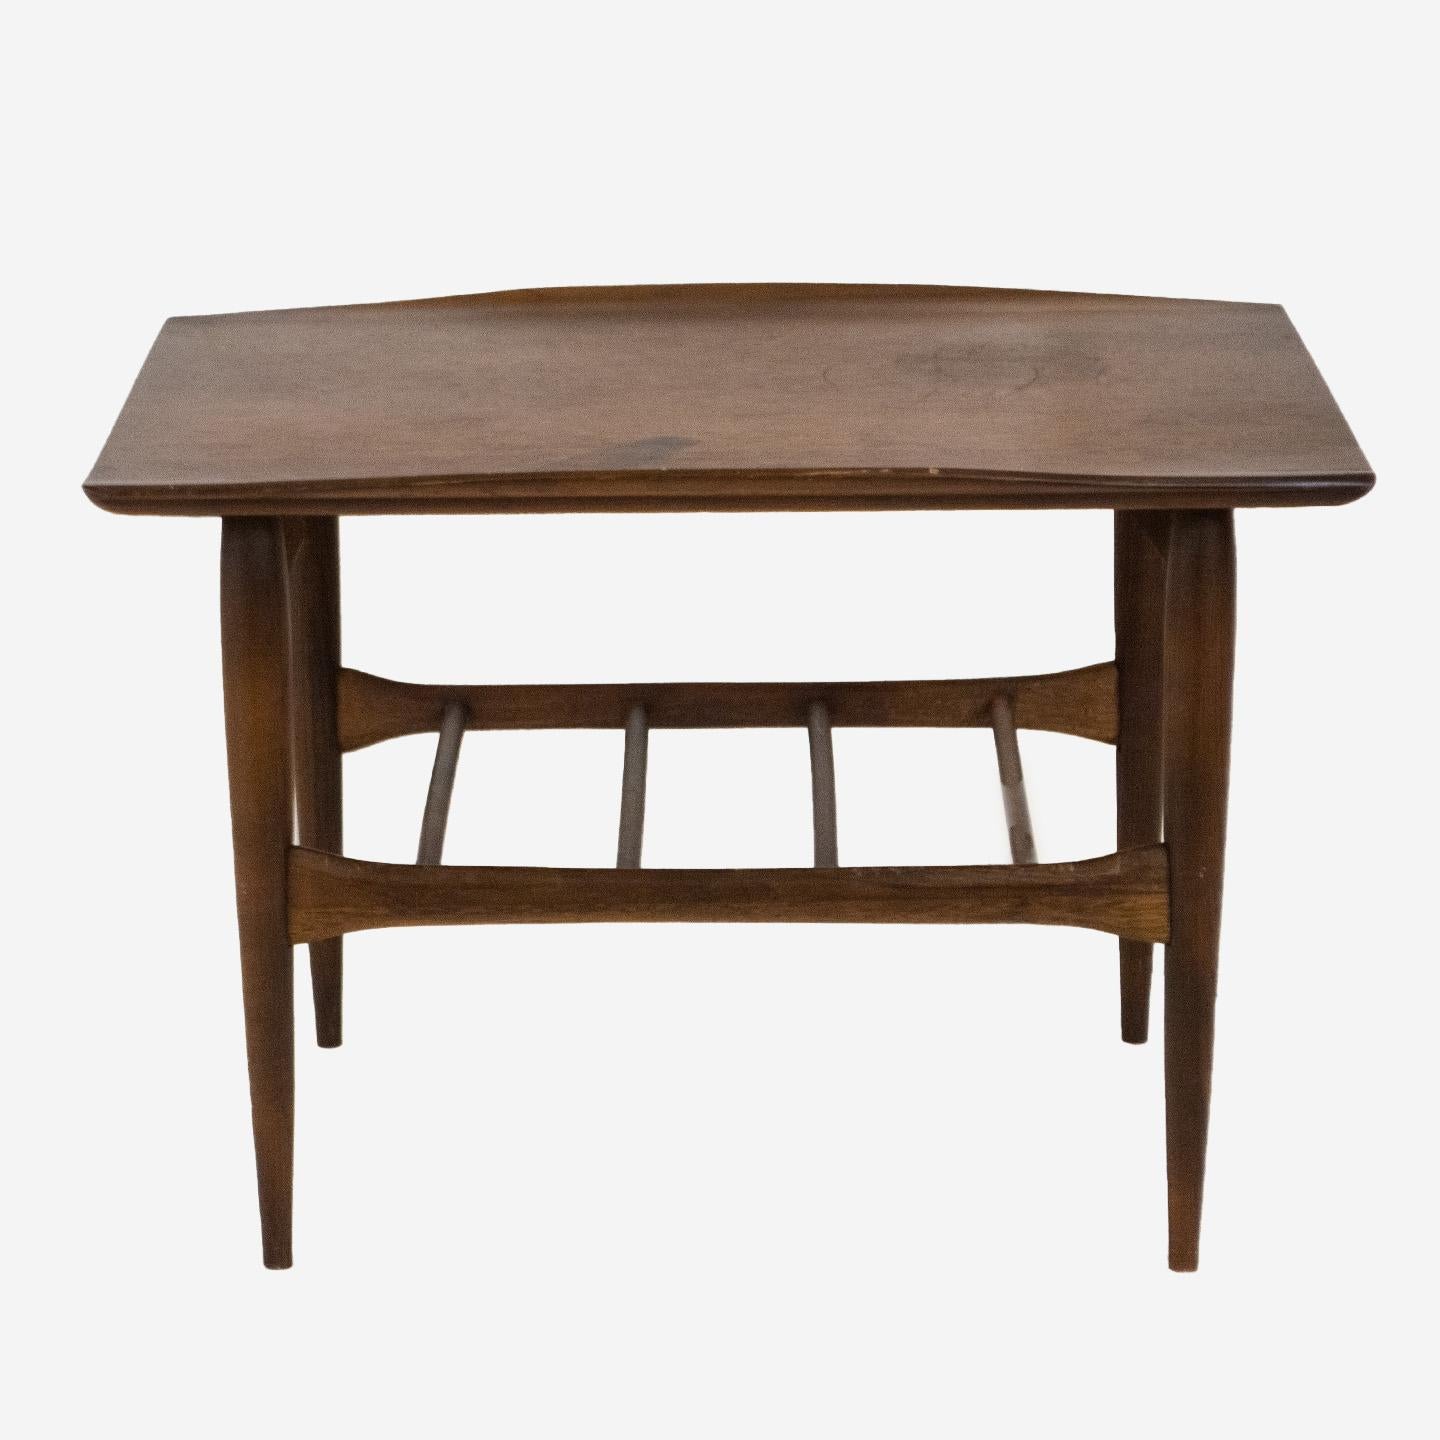 Mid-Century Modern walnut coffee table by Bassett Furniture Company, circa 1965. Surfboard style table with distinctive raised edges — typical of Danish modern production — but American produced. It's been constructed with solid walnut with gorgeous